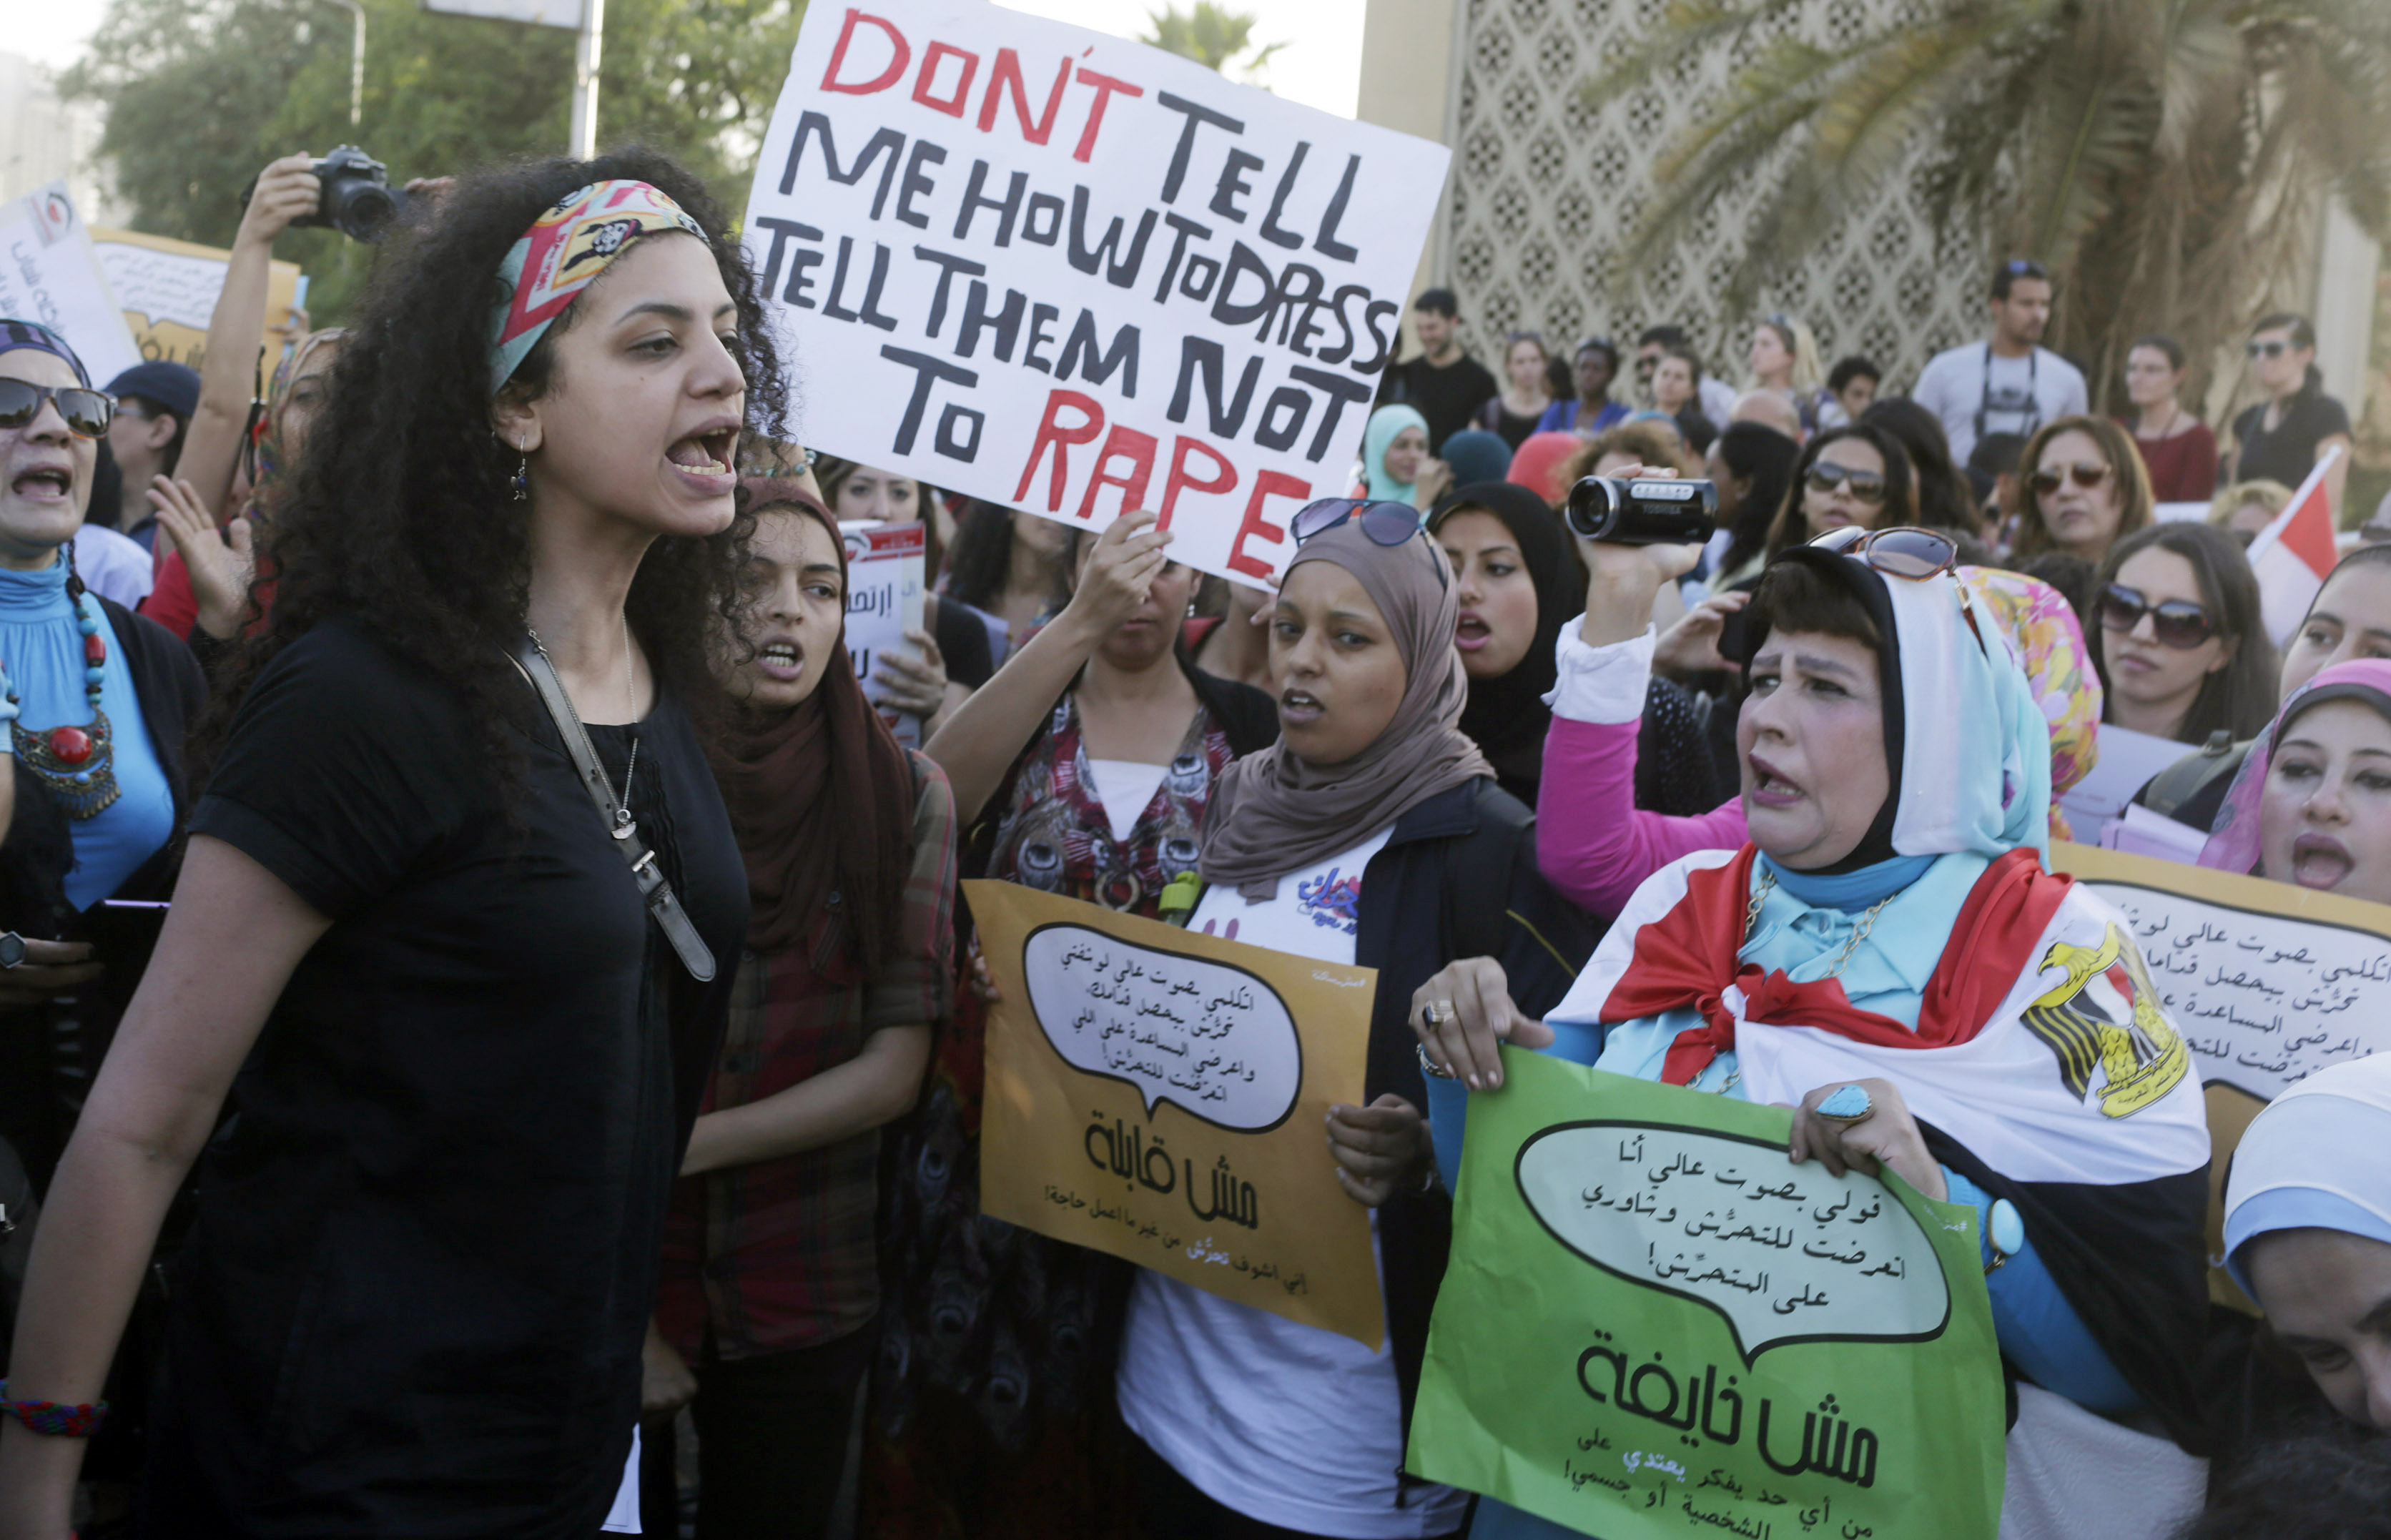 Women chant slogans as they gather to protest against sexual harassment in front of the opera house in Cairo June 14, 2014, after a woman was sexually assaulted by a mob during the June 8 celebrations marking the new president Abdel Fattah al-Sisi's inauguration in Tahrir square. Egypt has asked YouTube to remove a video showing the naked woman with injuries being dragged through the square after being sexually assaulted during the celebrations. Authorities have arrested seven men aged between 15 and 49 for sexually harassing women on the square after the posting of the video, which caused an uproar in local and international media. REUTERS/Asmaa Waguih (EGYPT - Tags: POLITICS CIVIL UNREST CRIME LAW) - RTR3TS3T